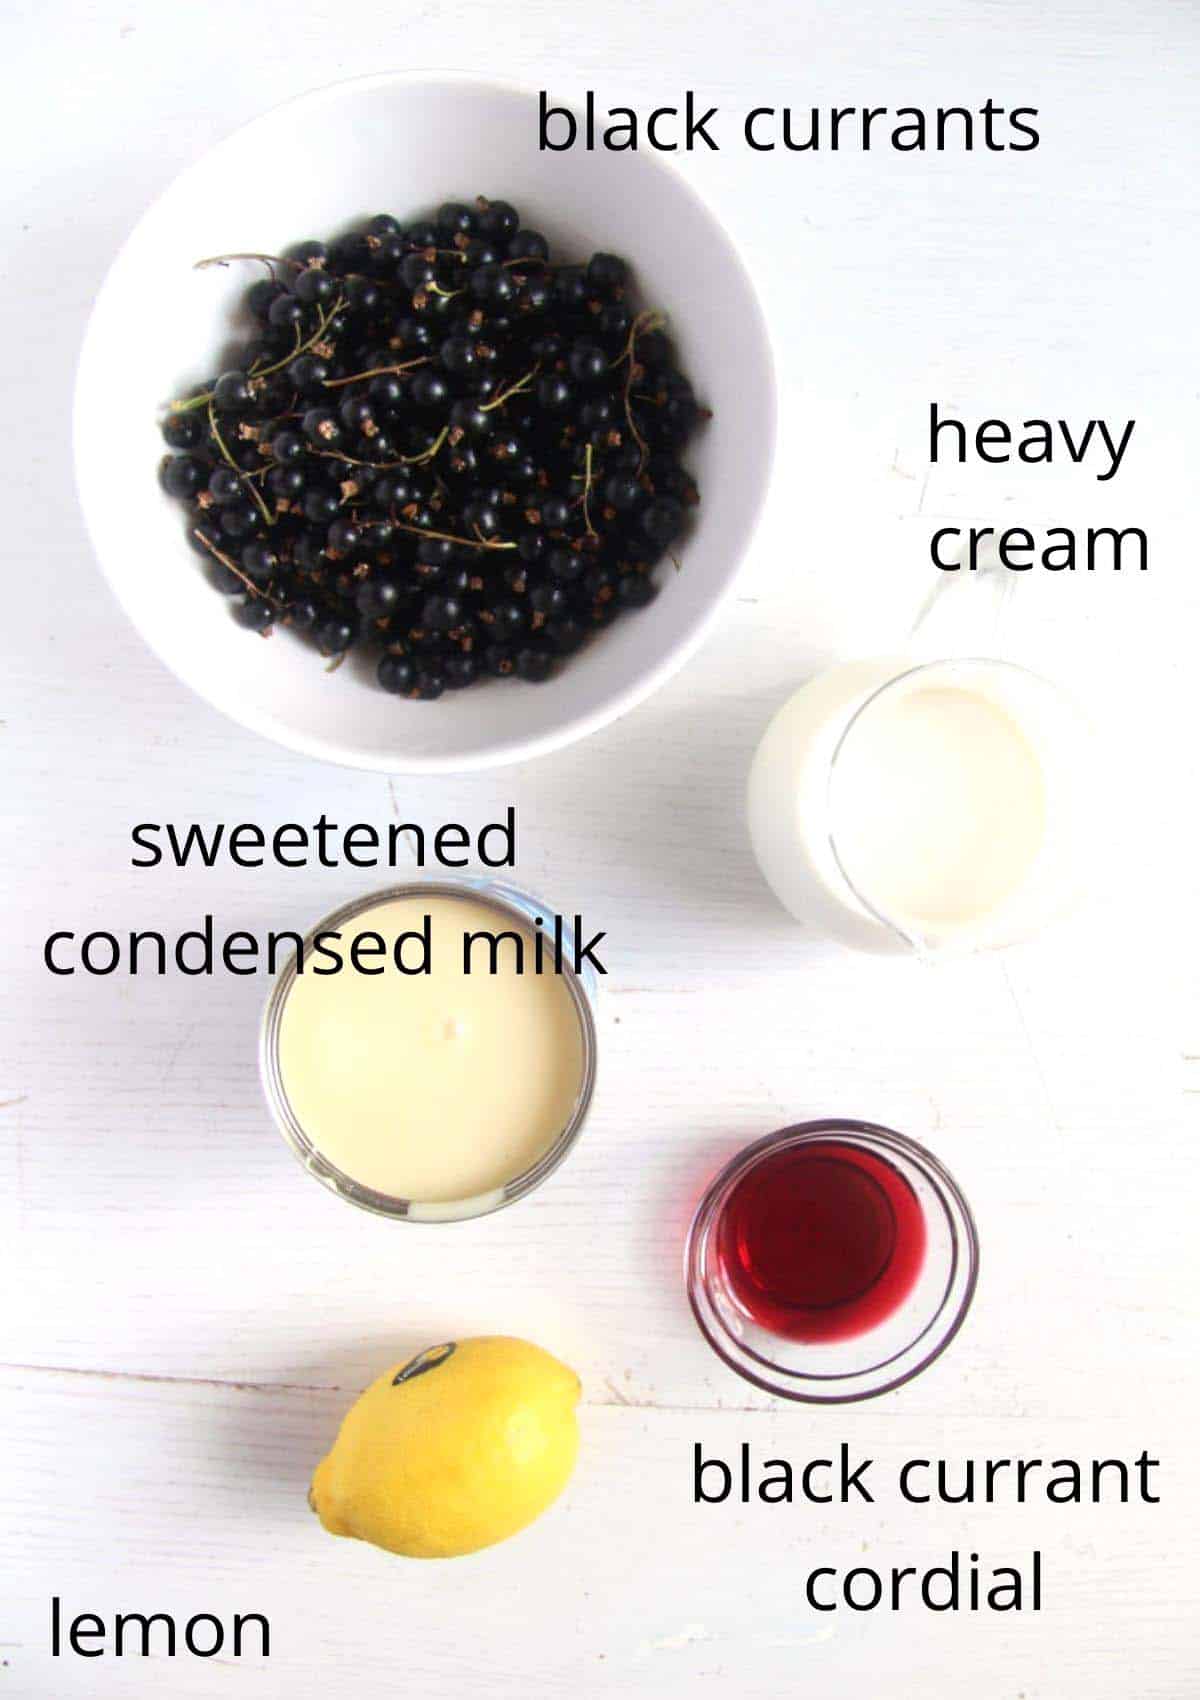 bowls with black currants, cream, condensed milk, lemon and cordial overhead view.